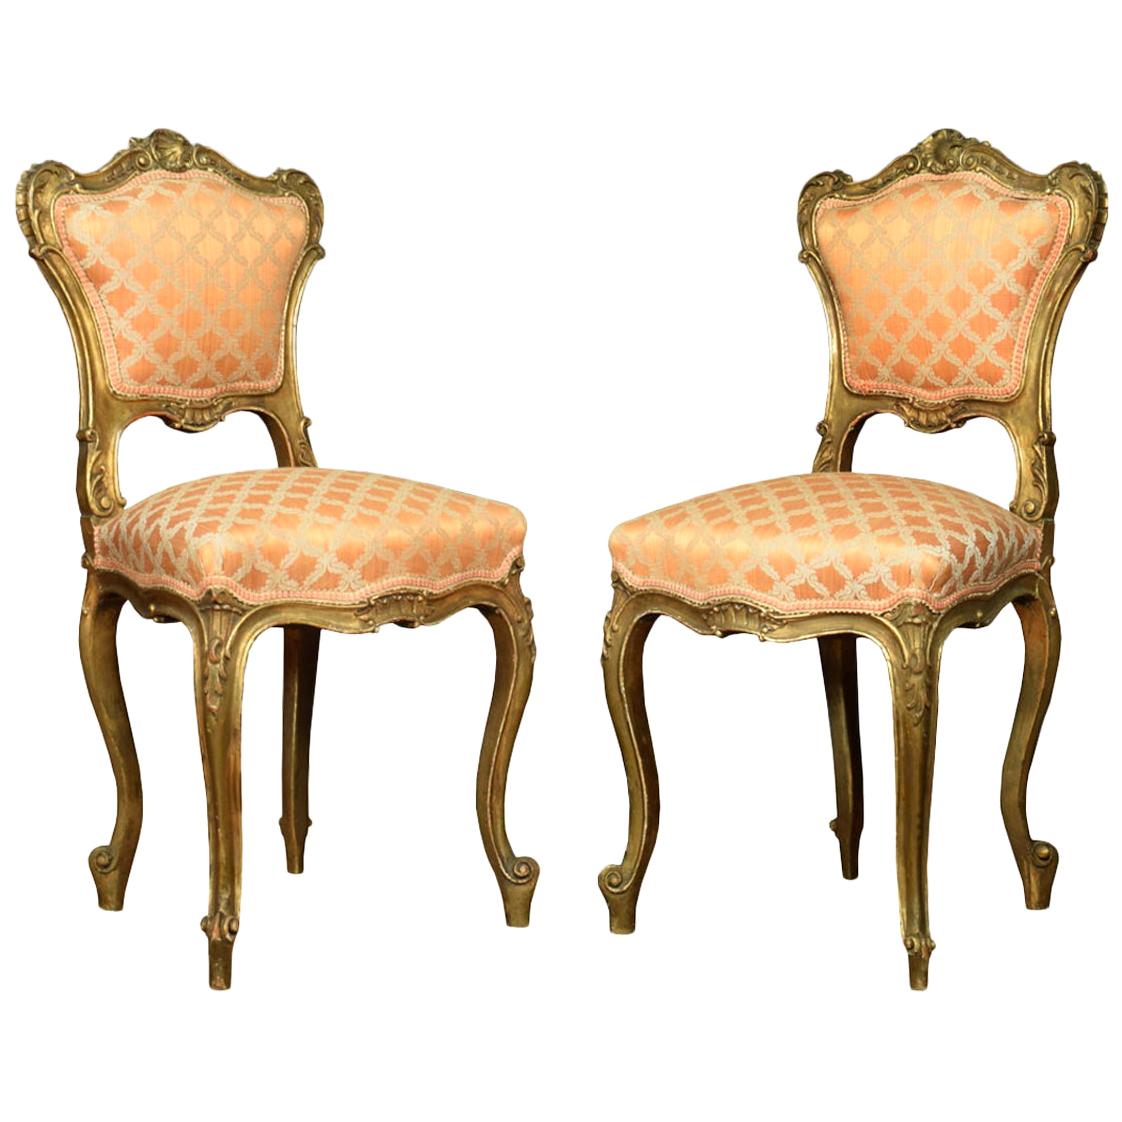 Pair of Louis XVL Style Giltwood Side